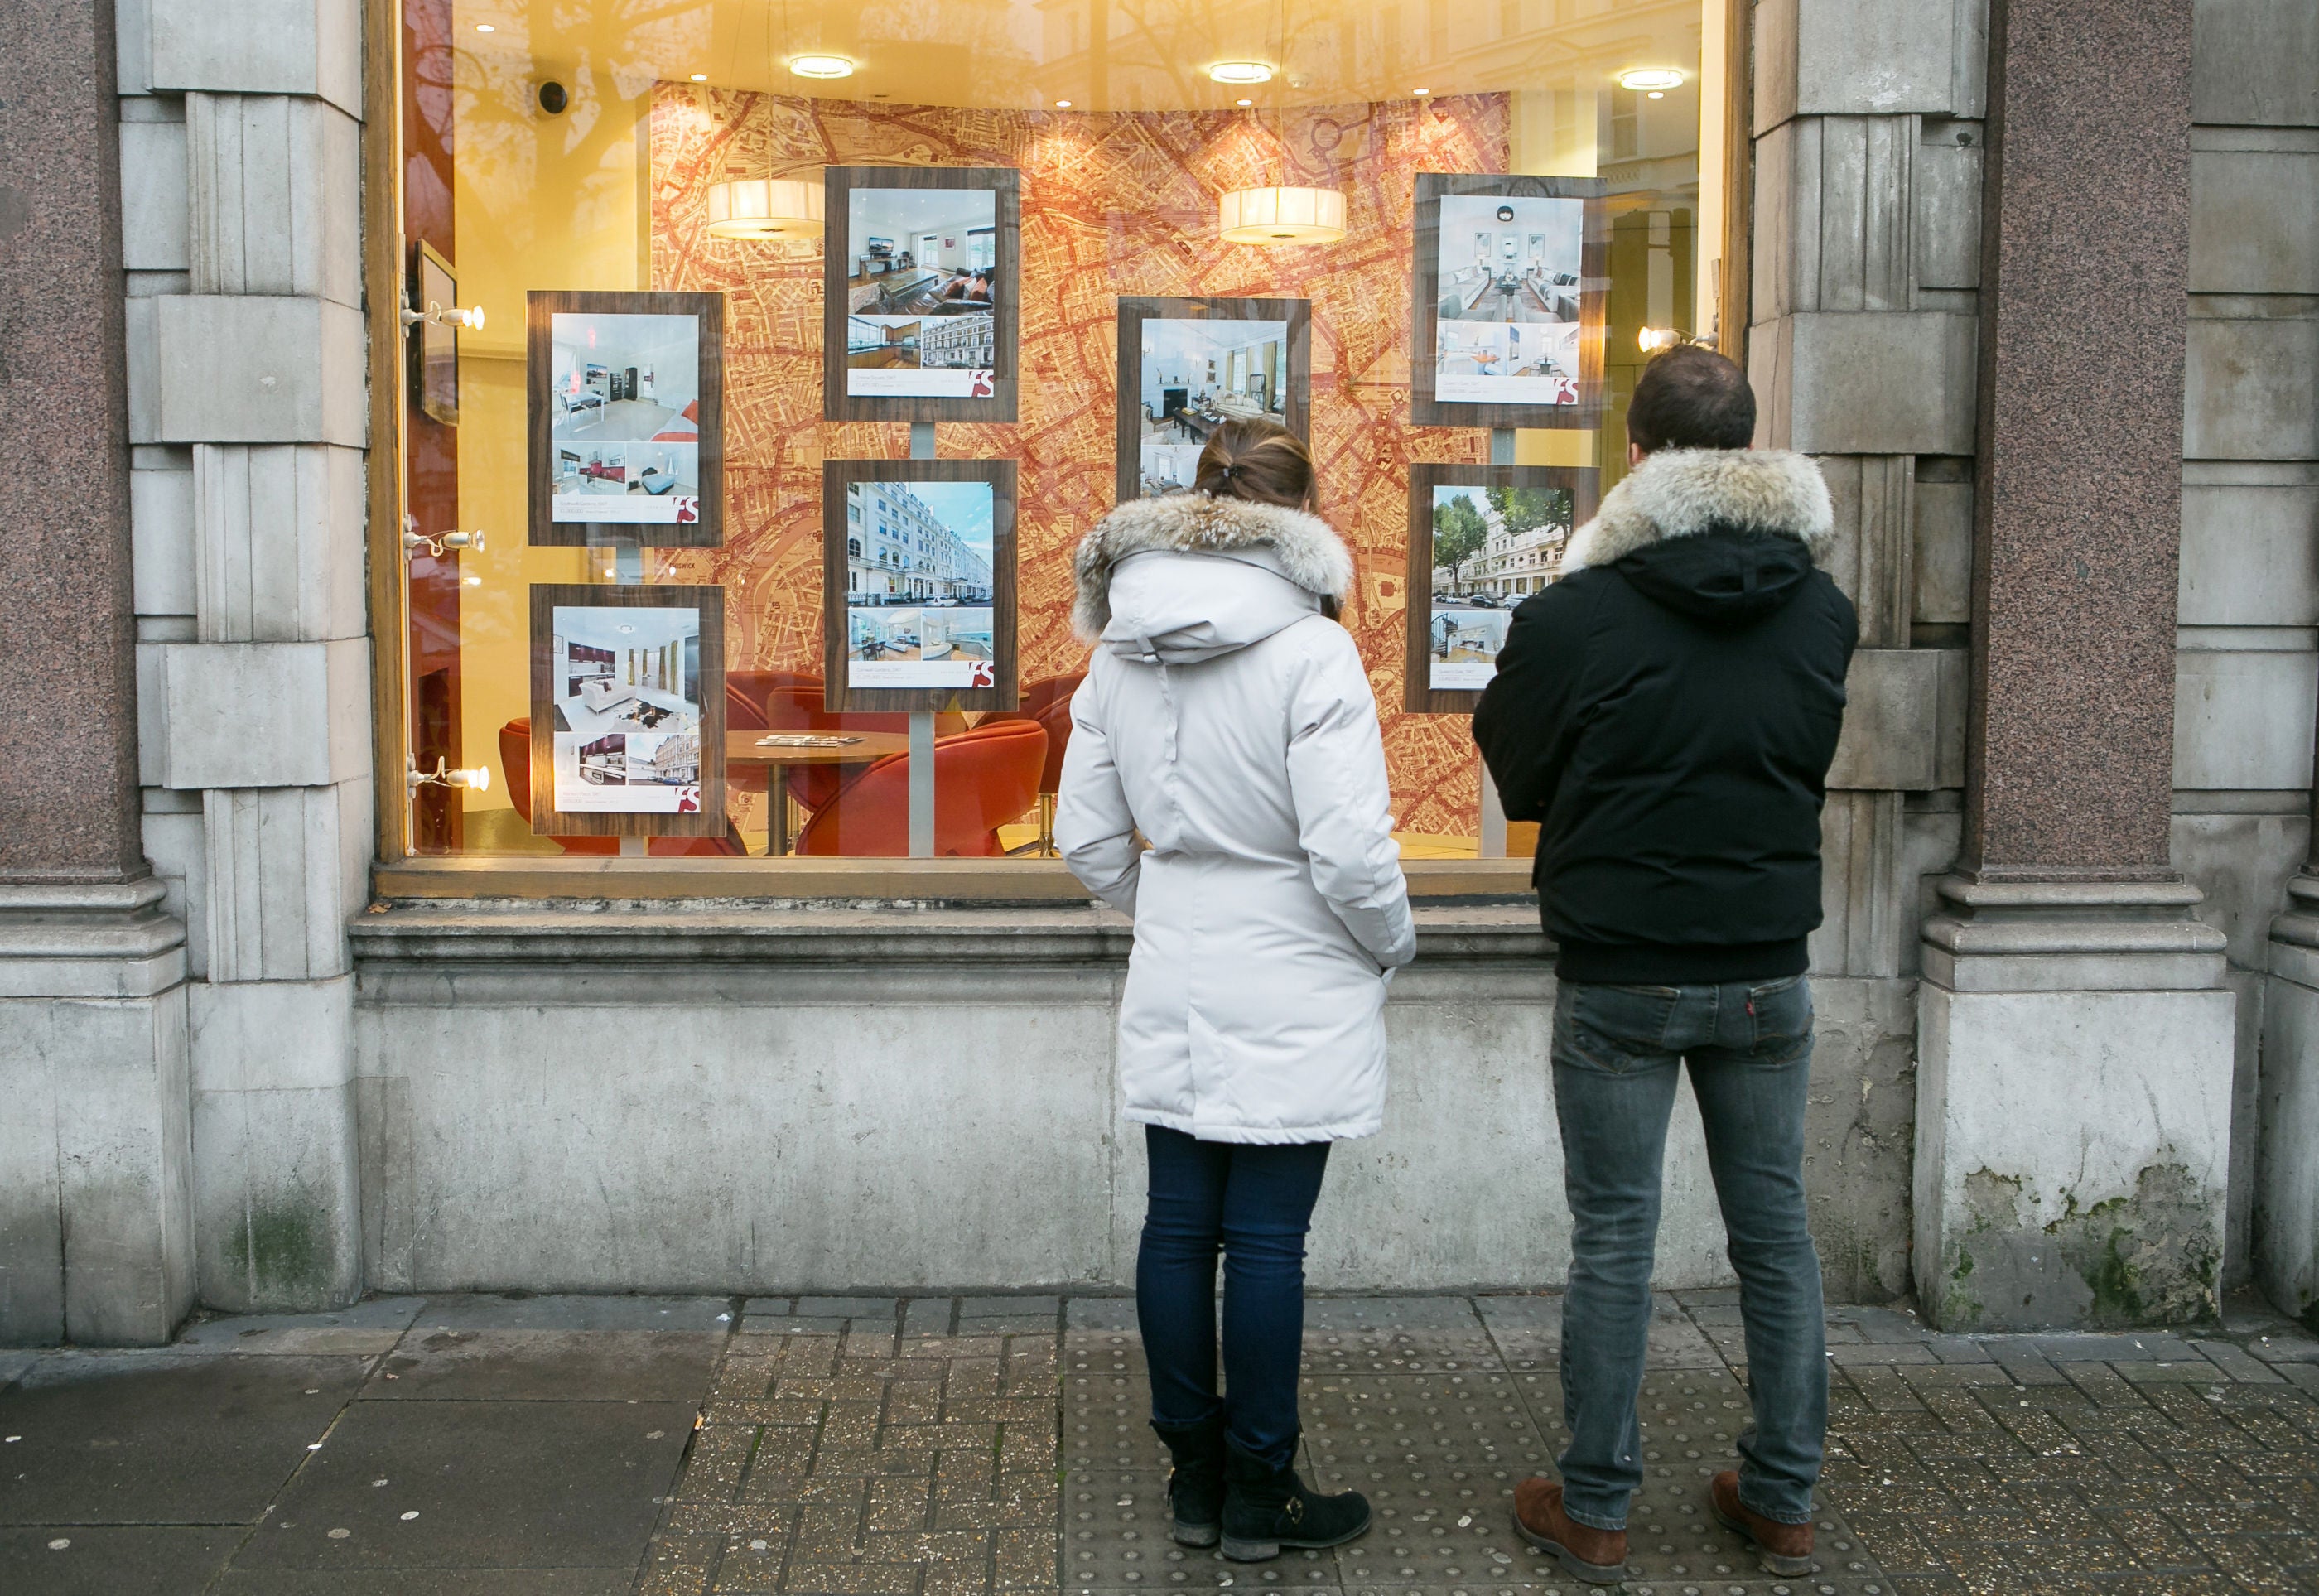 The bank of mum and dad will have supported nearly half of all first-time buyer housing transactions this year, according to a forecast from Savills (Daniel Leal-Olivas/PA)